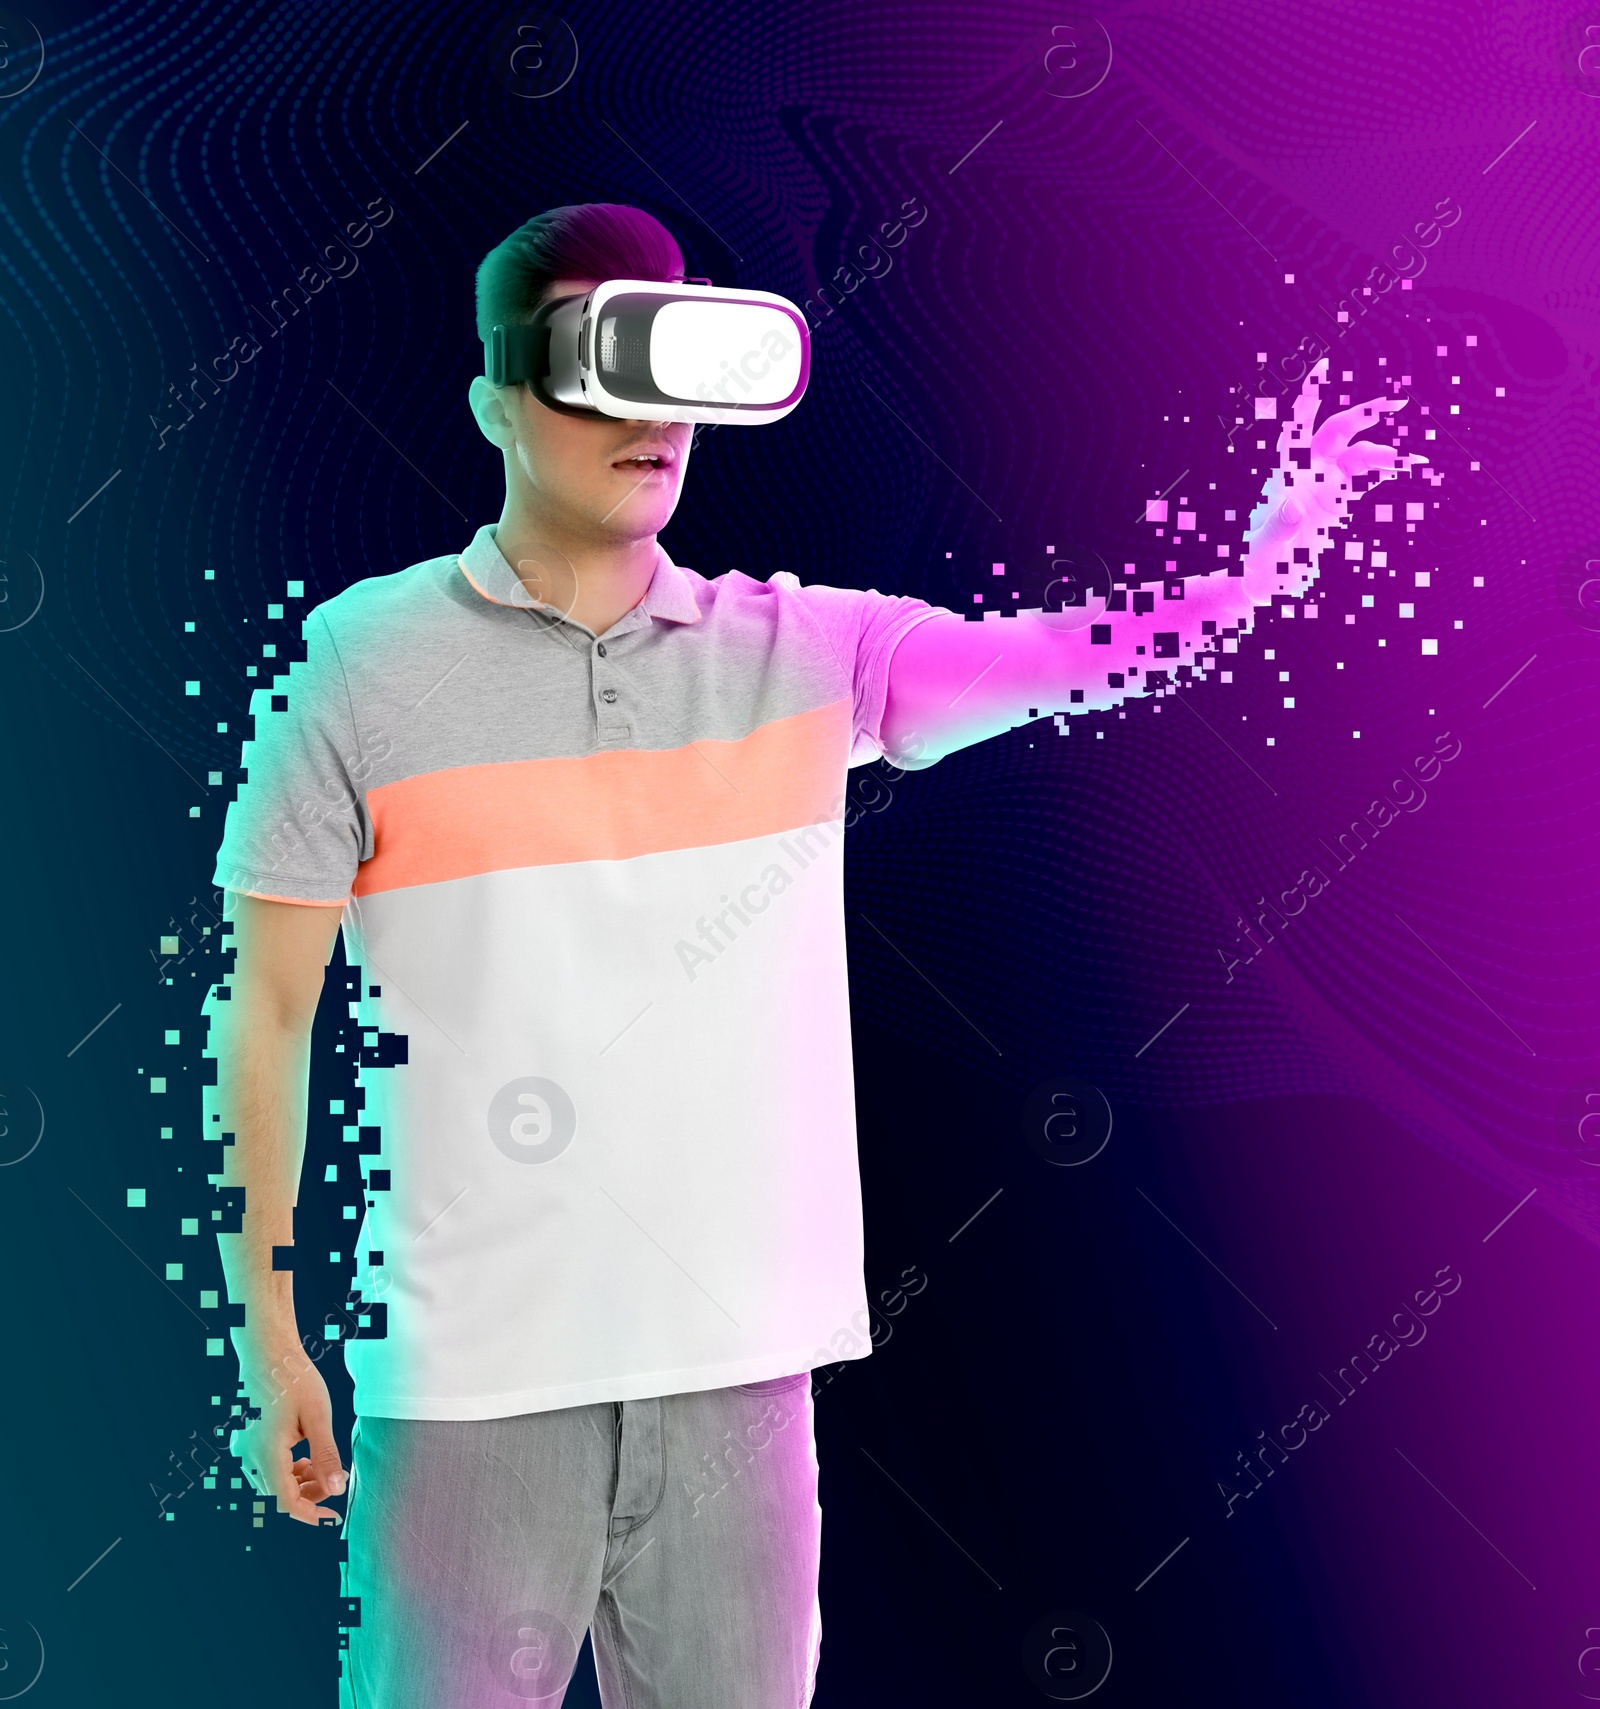 Image of Metaverse. Man using virtual reality headset in neon lights. His hands dispersing into pixels illustrating immersion into cyber space